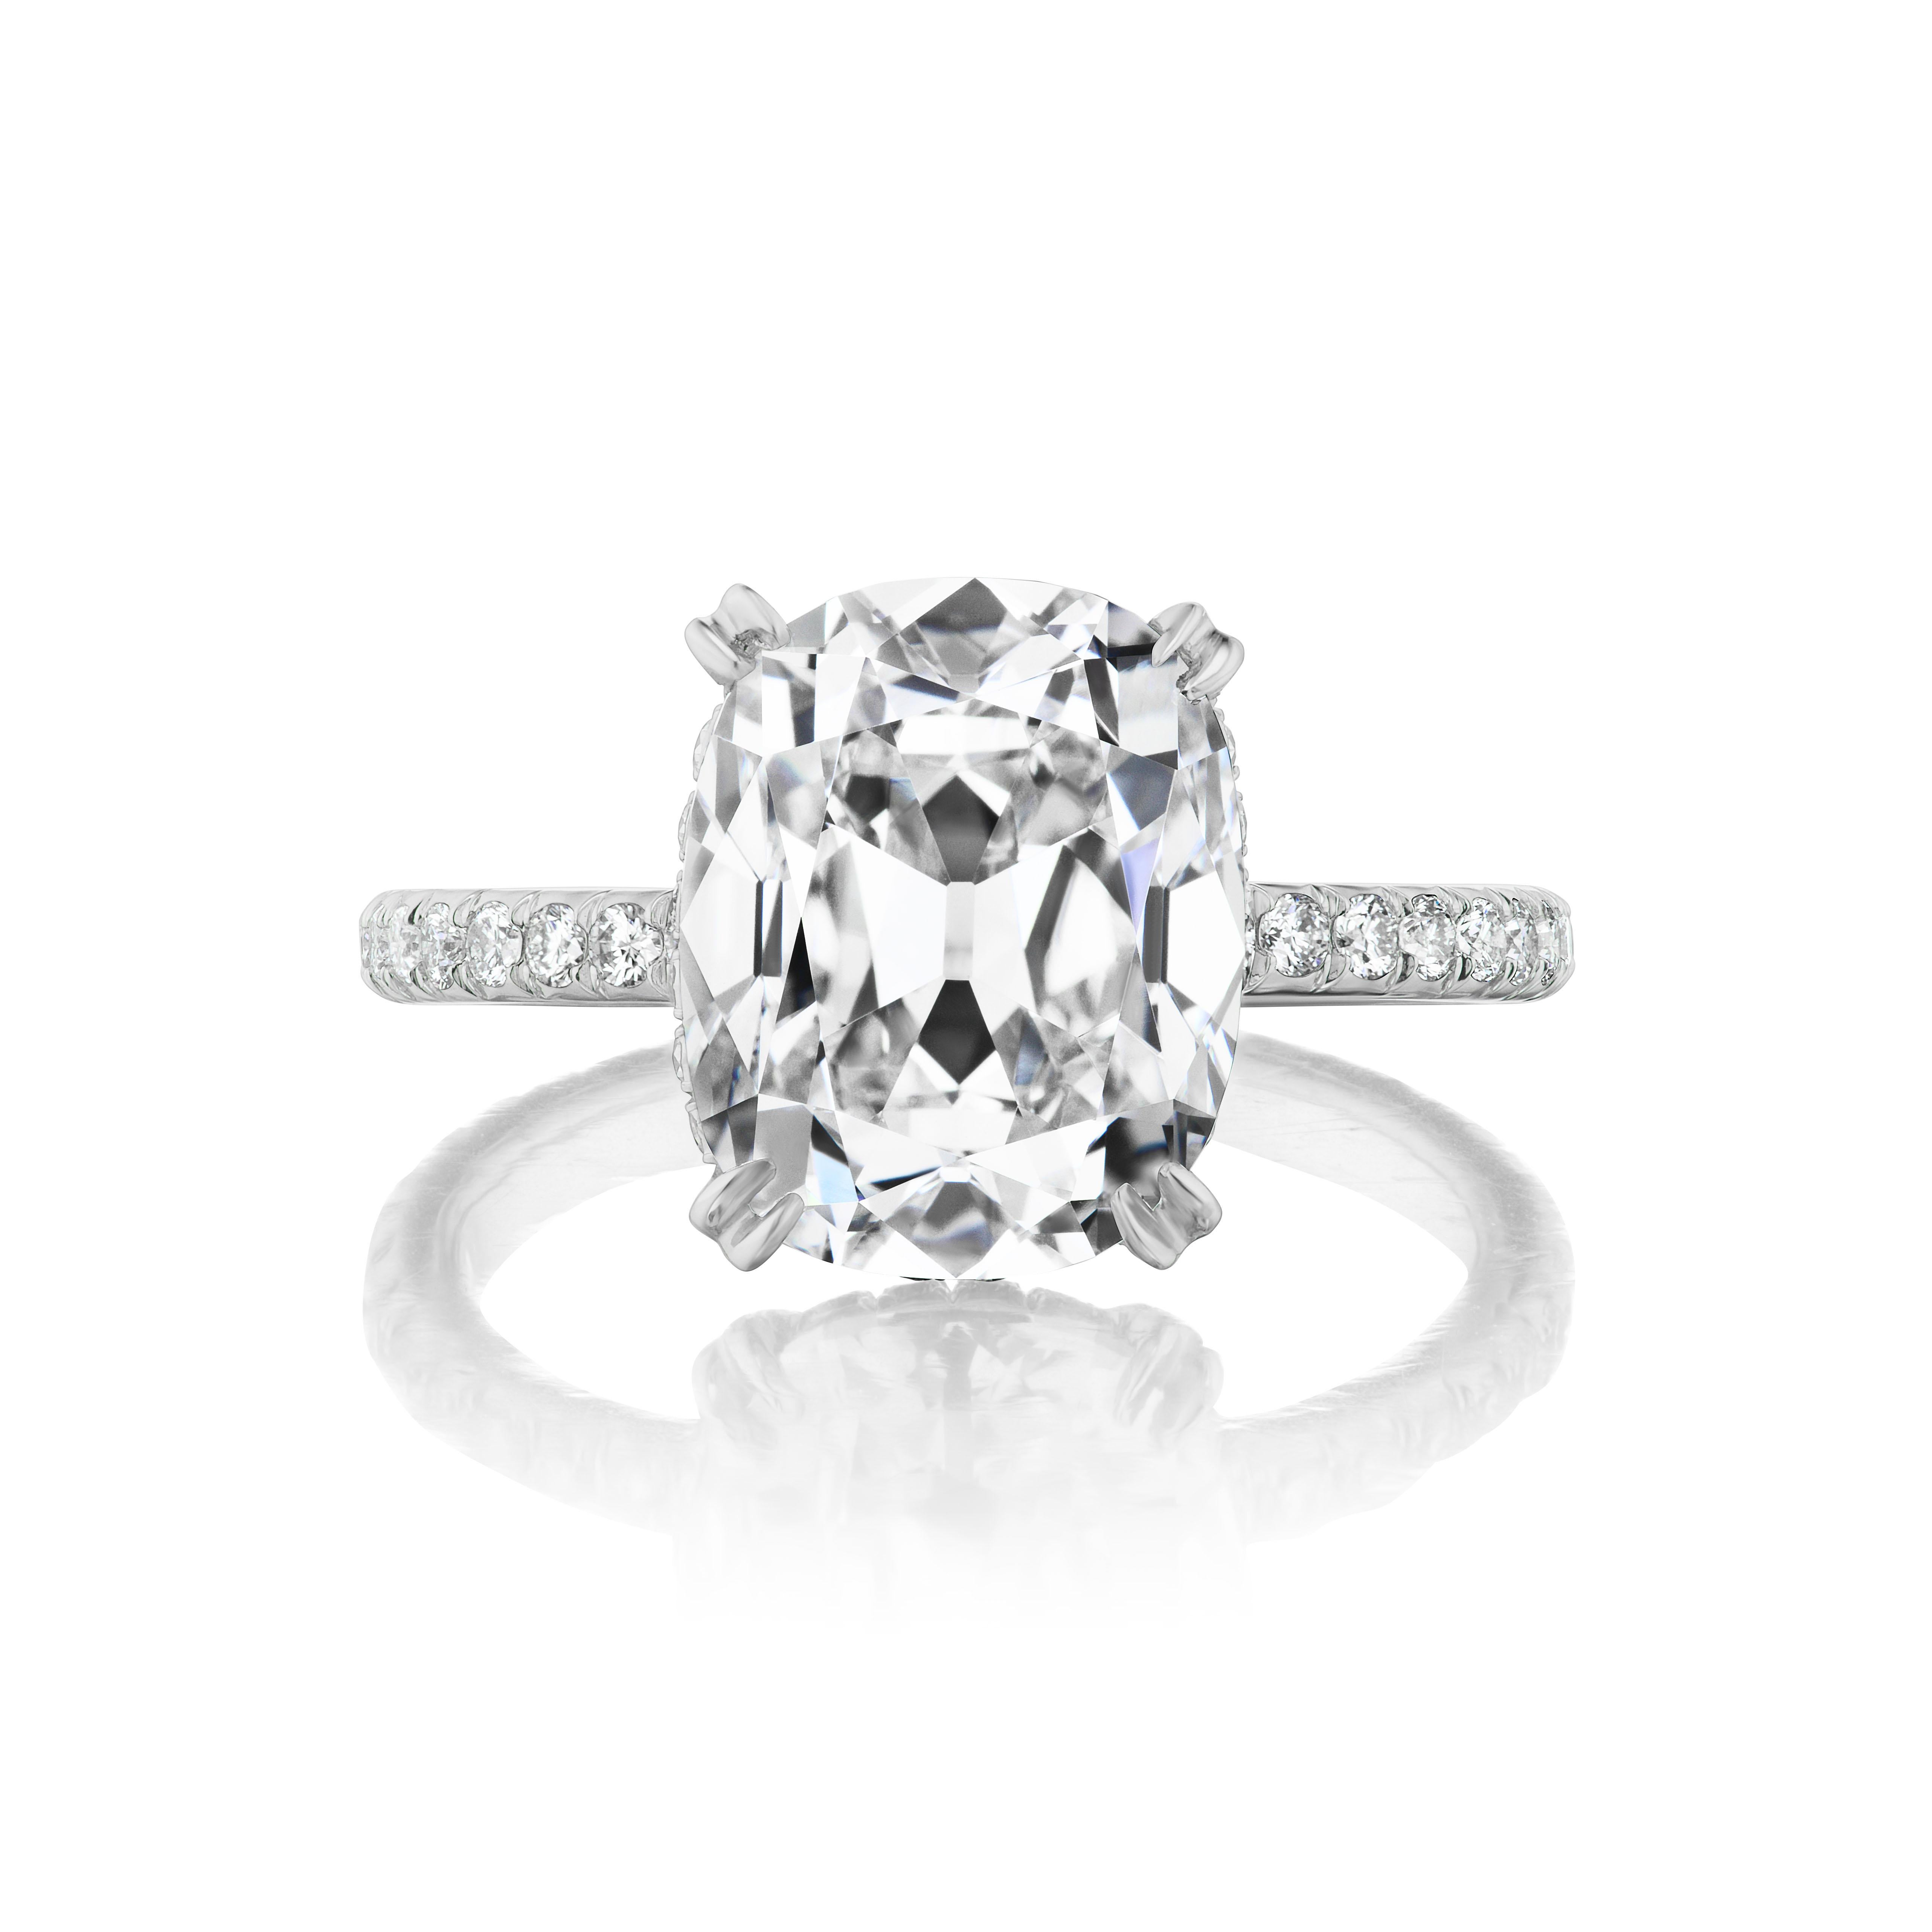 This rare and charming 5.07 carat antique cushion-cut diamond is mounted in a simple and delightful diamond pavé and platinum ring with diamonds weighing approximately 1.50 carats on the basket, seat, and full length of the band. 

Comes with GIA